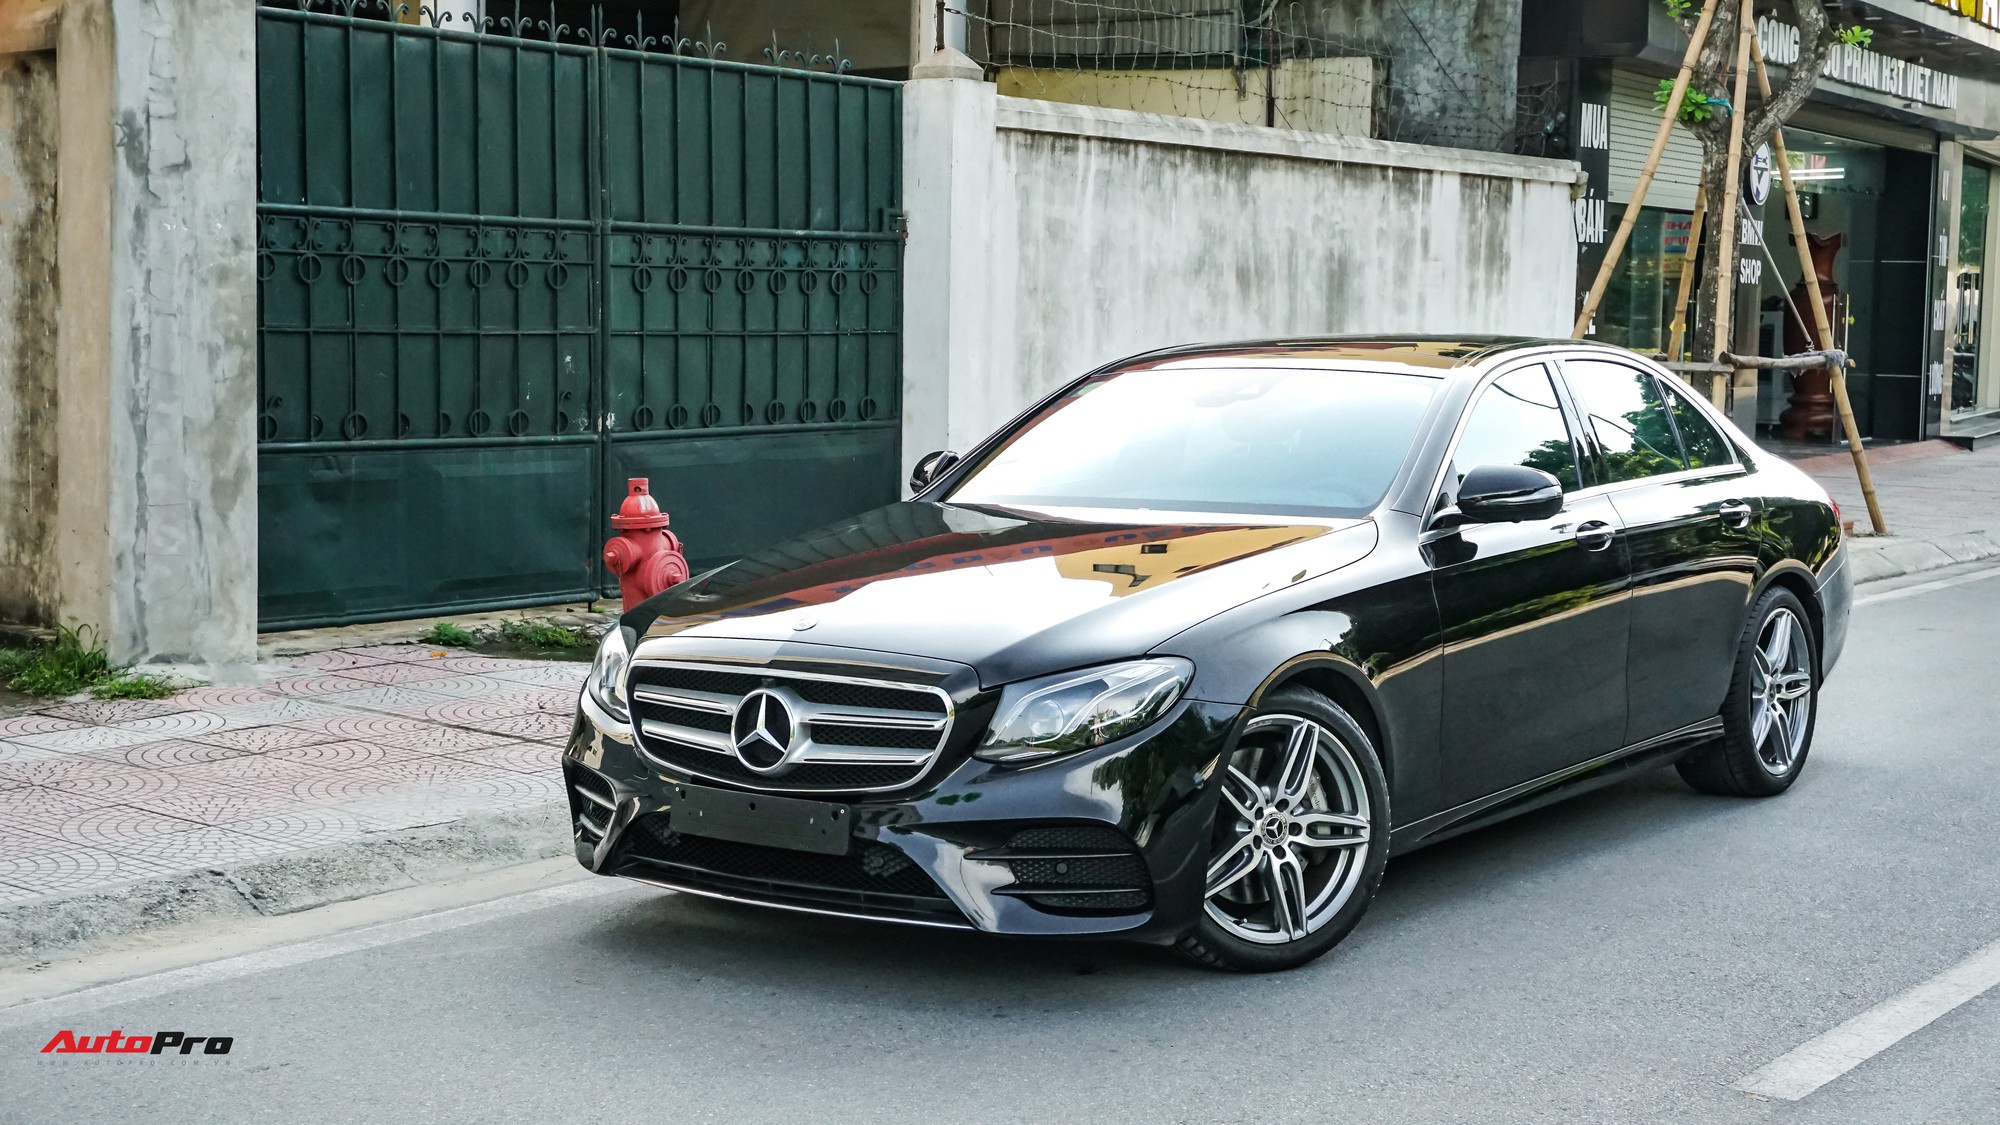 Oasis Cars  Make an Offer for Mercedes Benz E300 2015